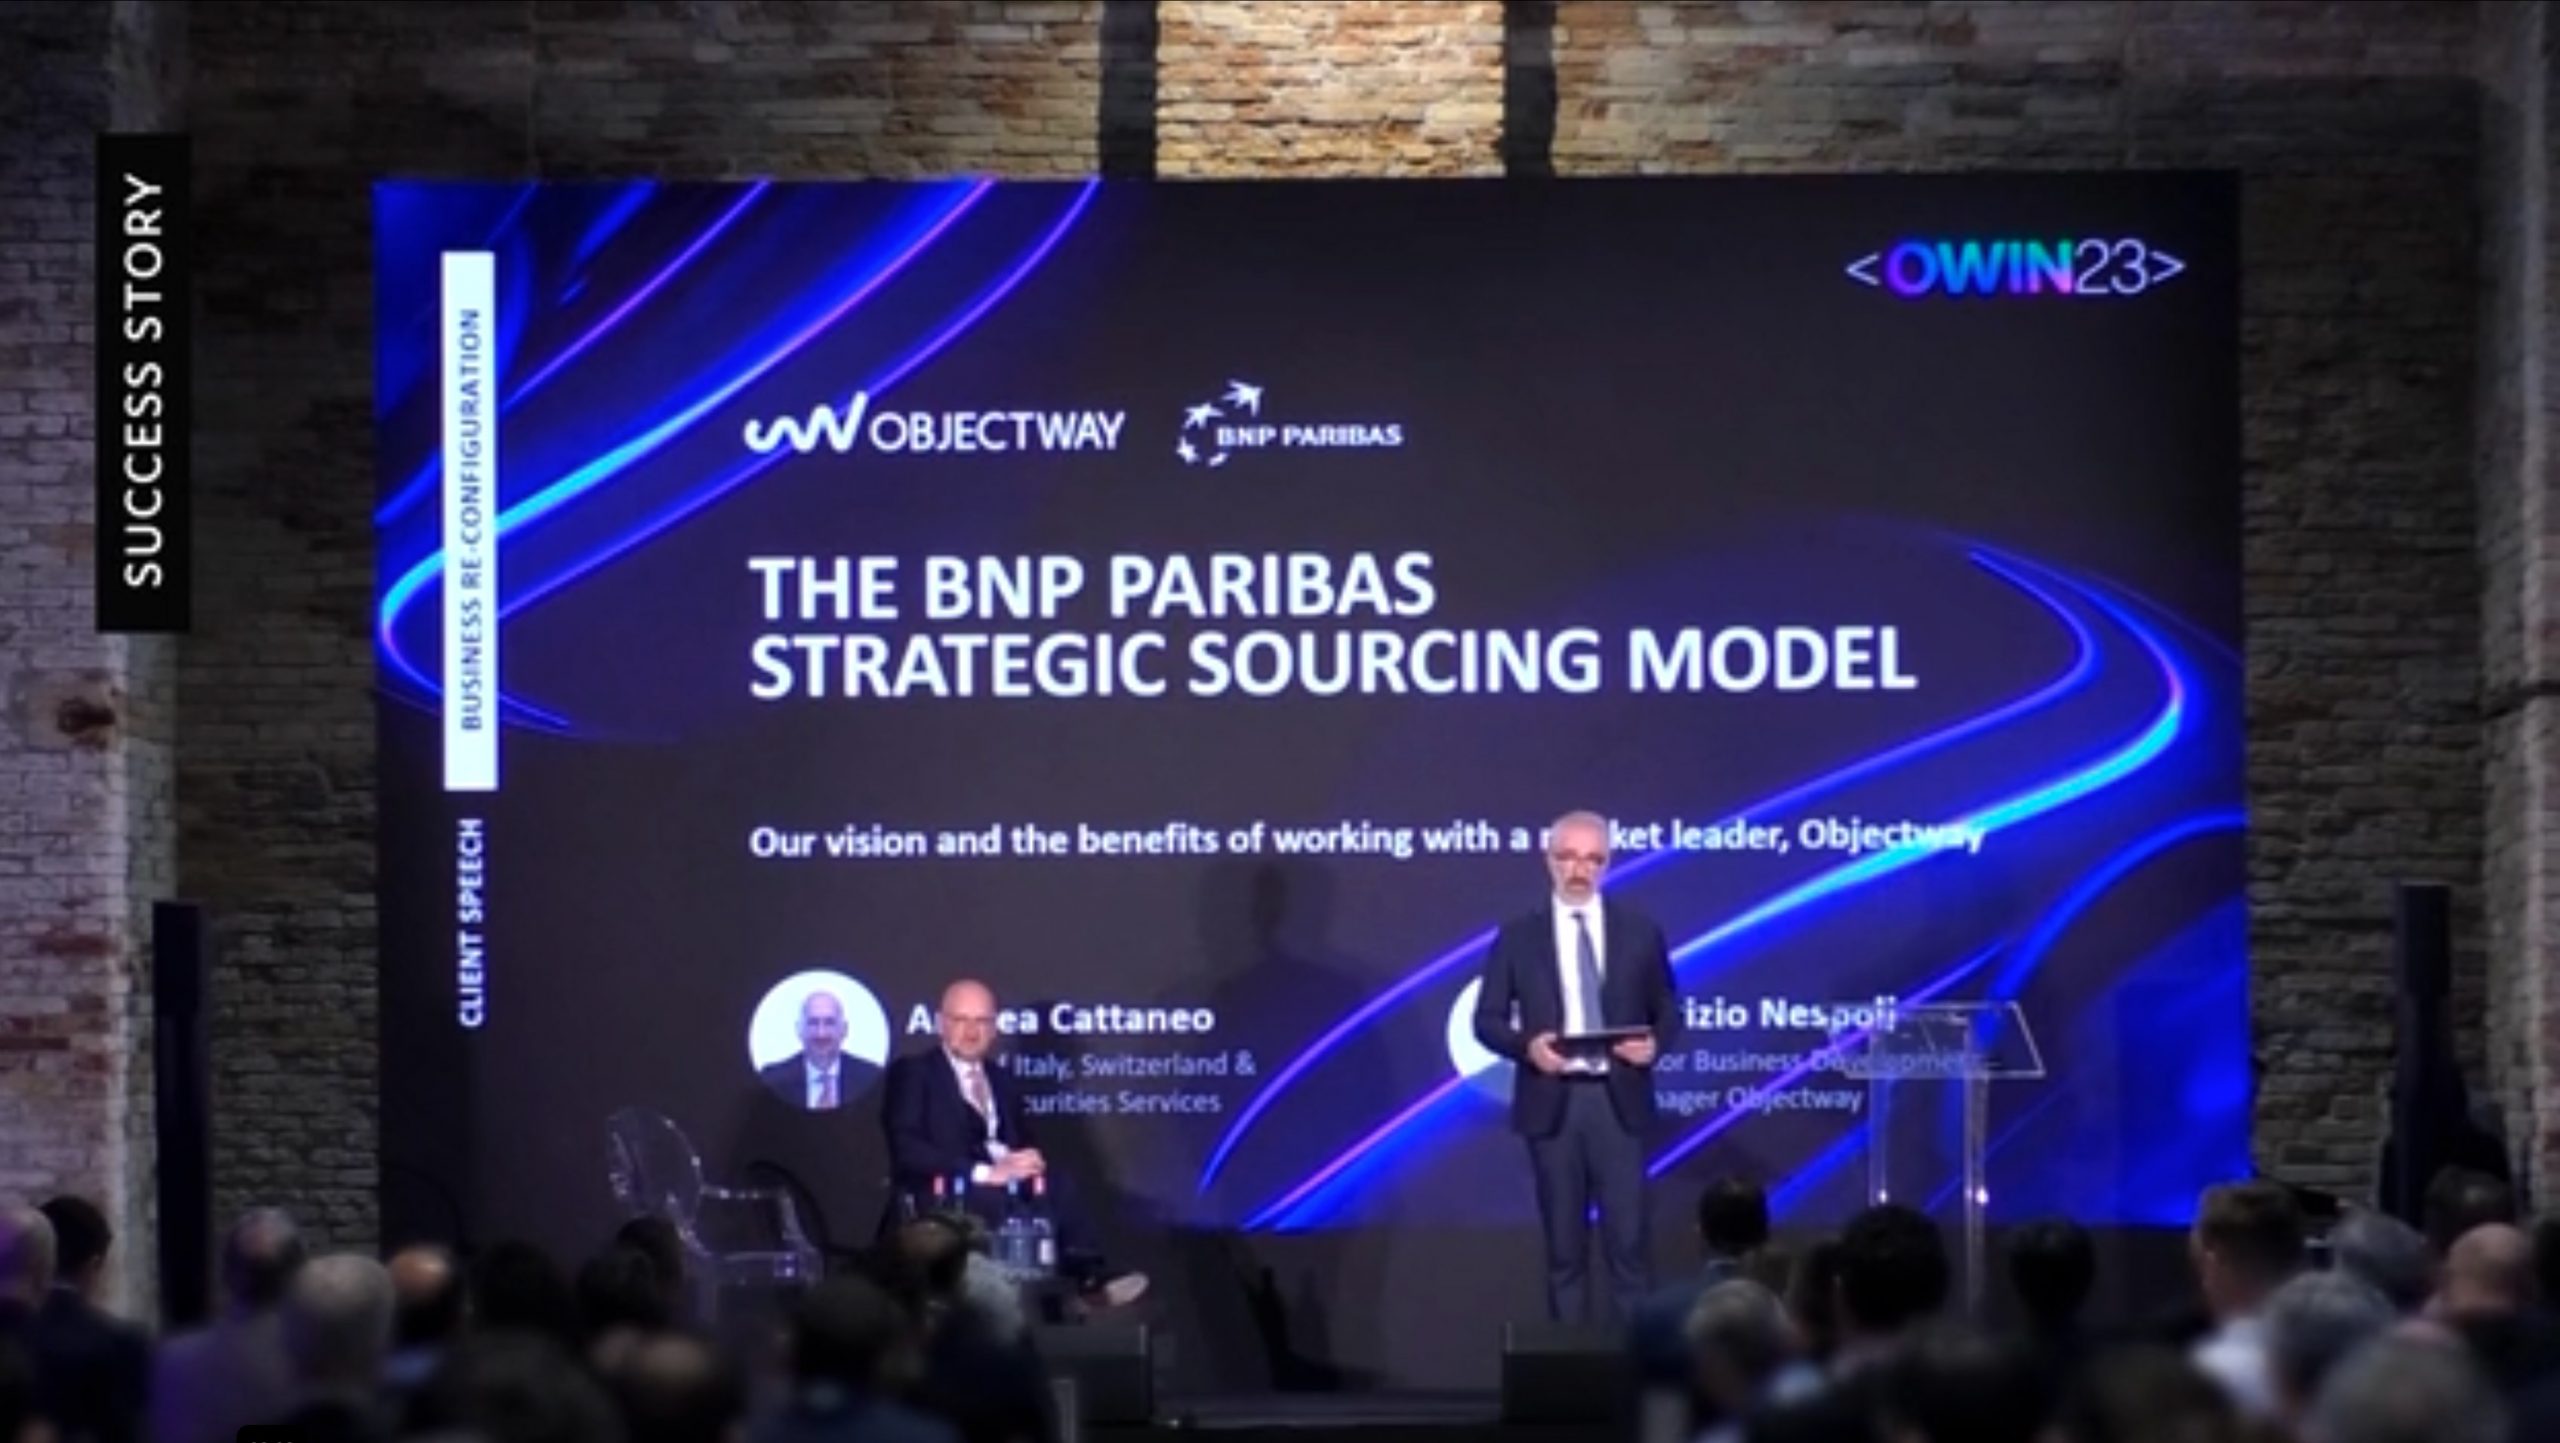 Fabrizio Nespoli, Objectway Senior Business Development Manager, presenting BNP Paribas Success Story during Objectway Customer Conference in Venice.